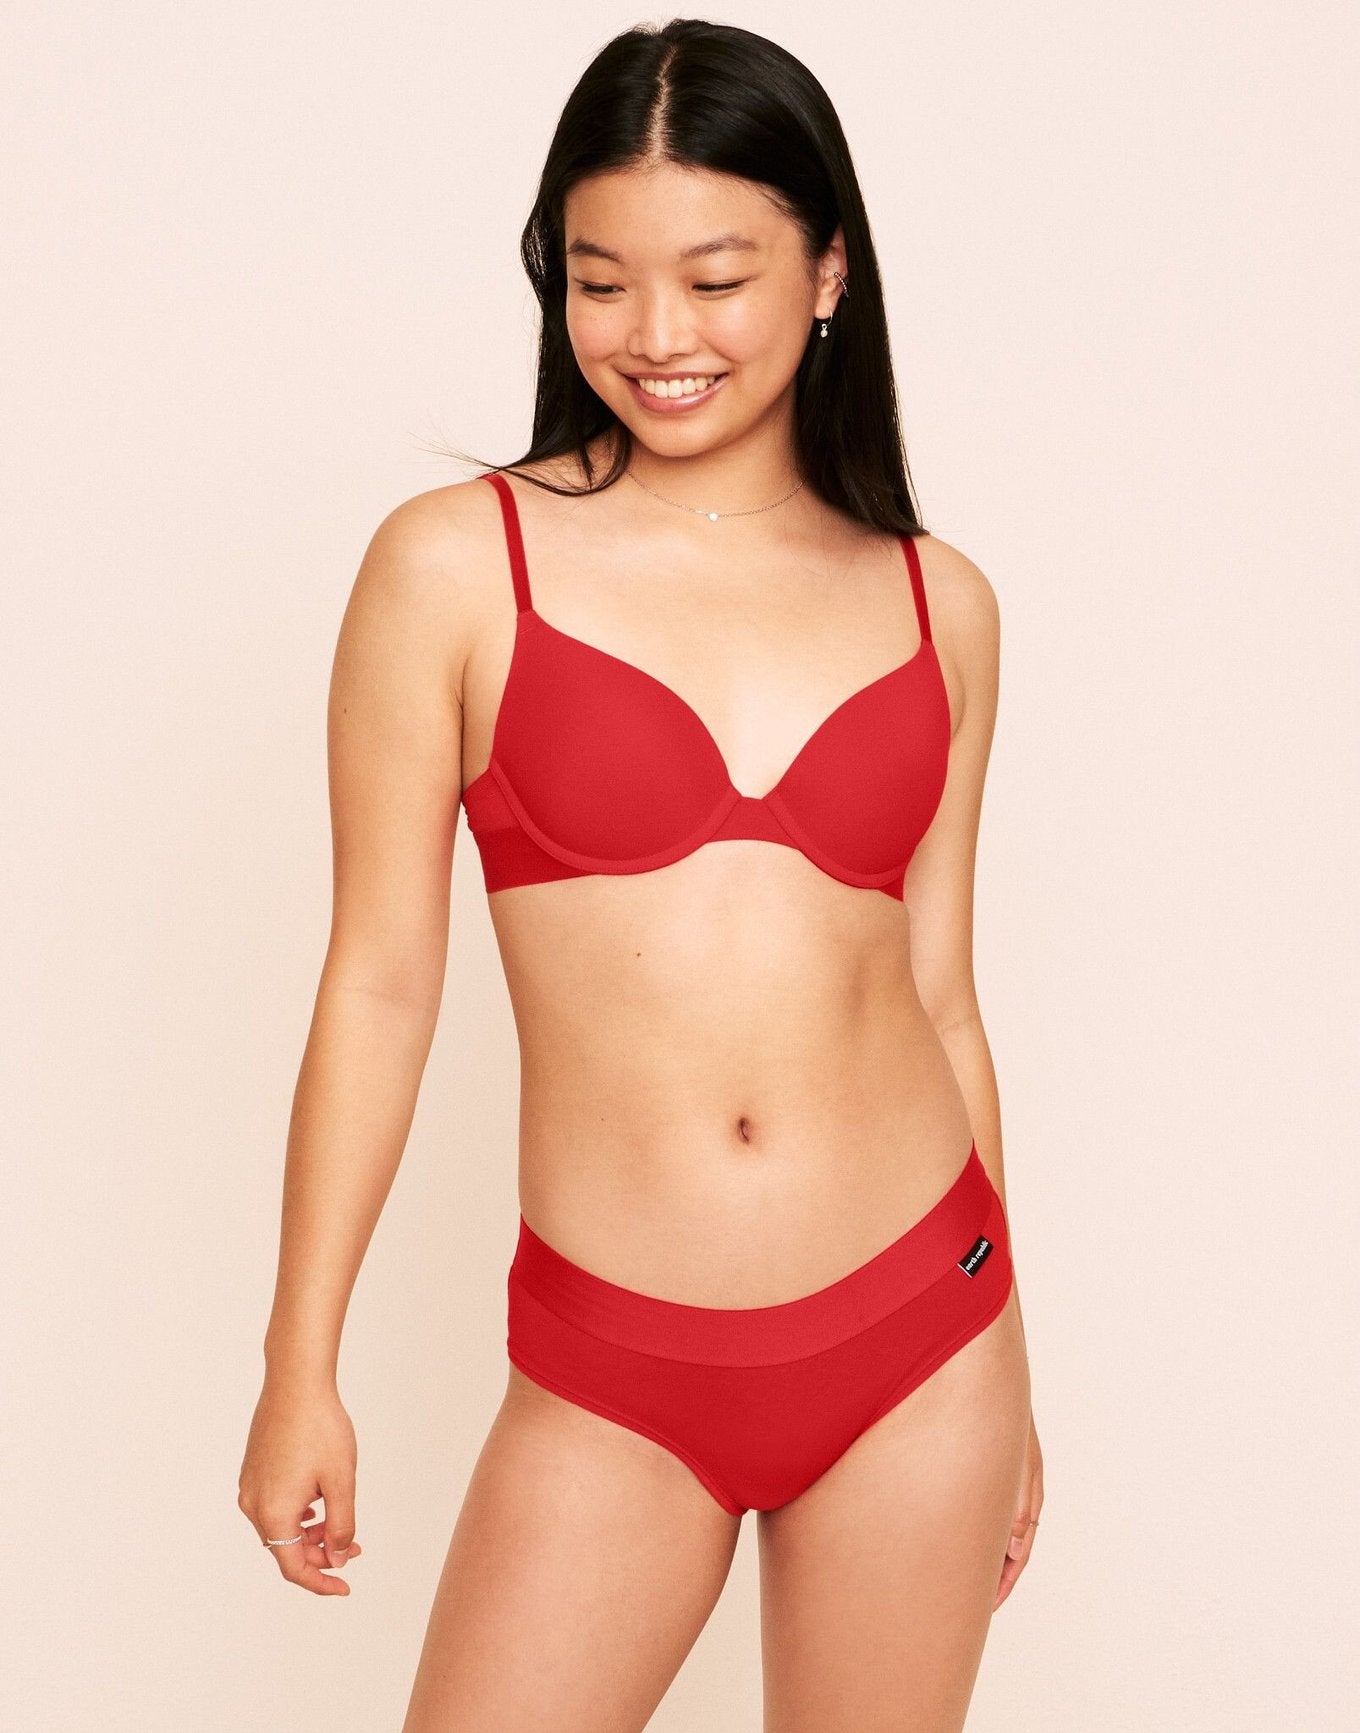 Earth Republic Jordyn Plunge Push Up Bra Push-Up Bra in color Flame Scarlet and shape plunge